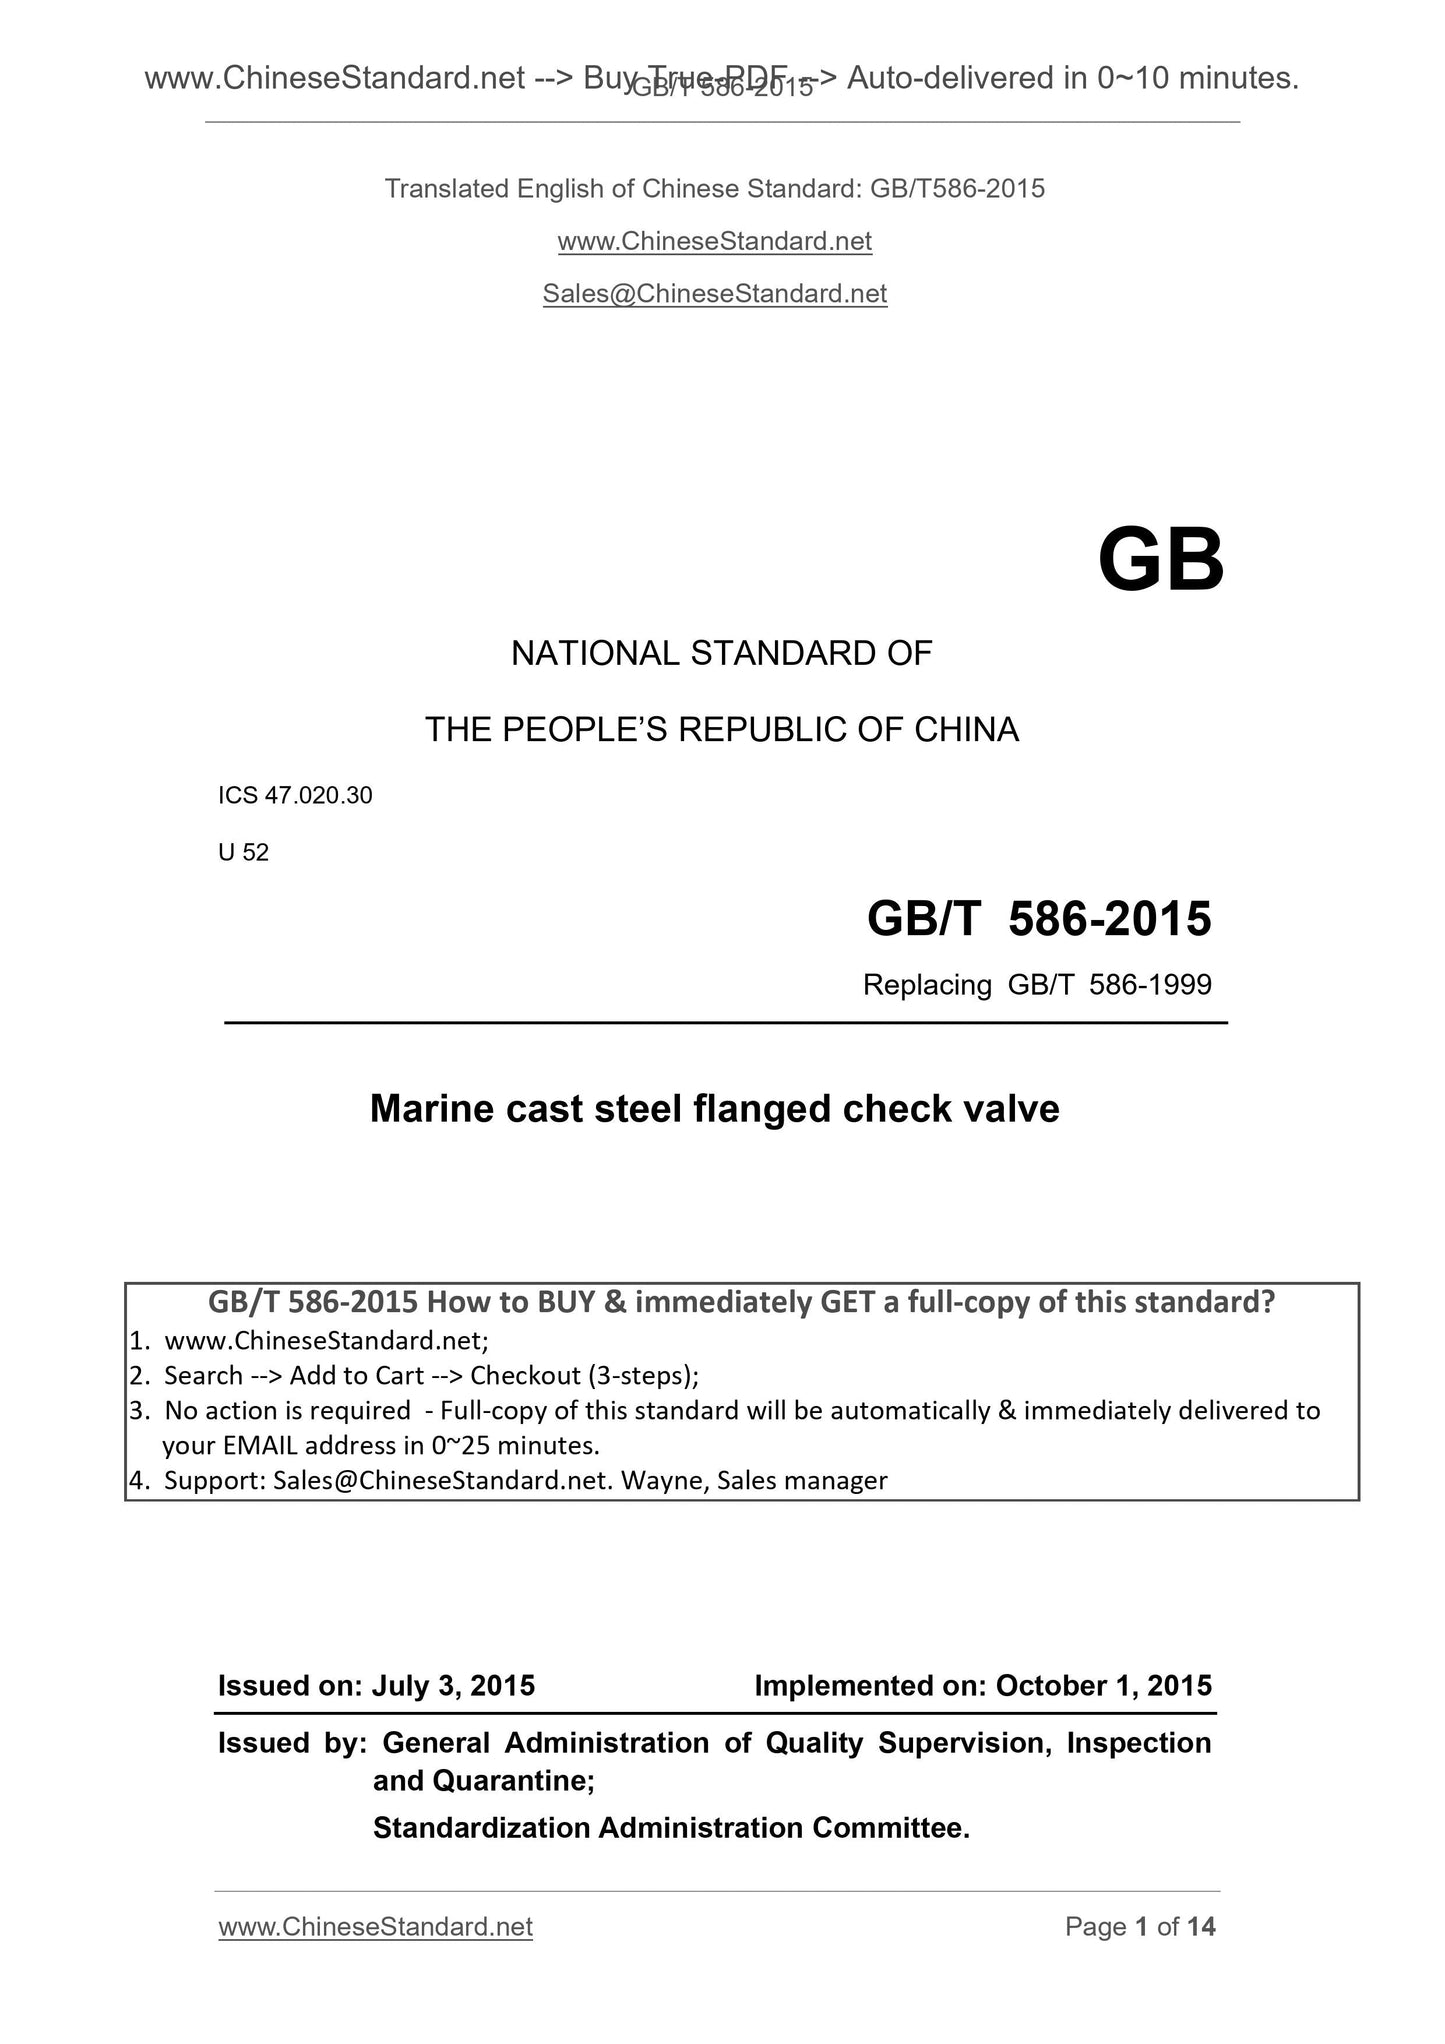 GB/T 586-2015 Page 1